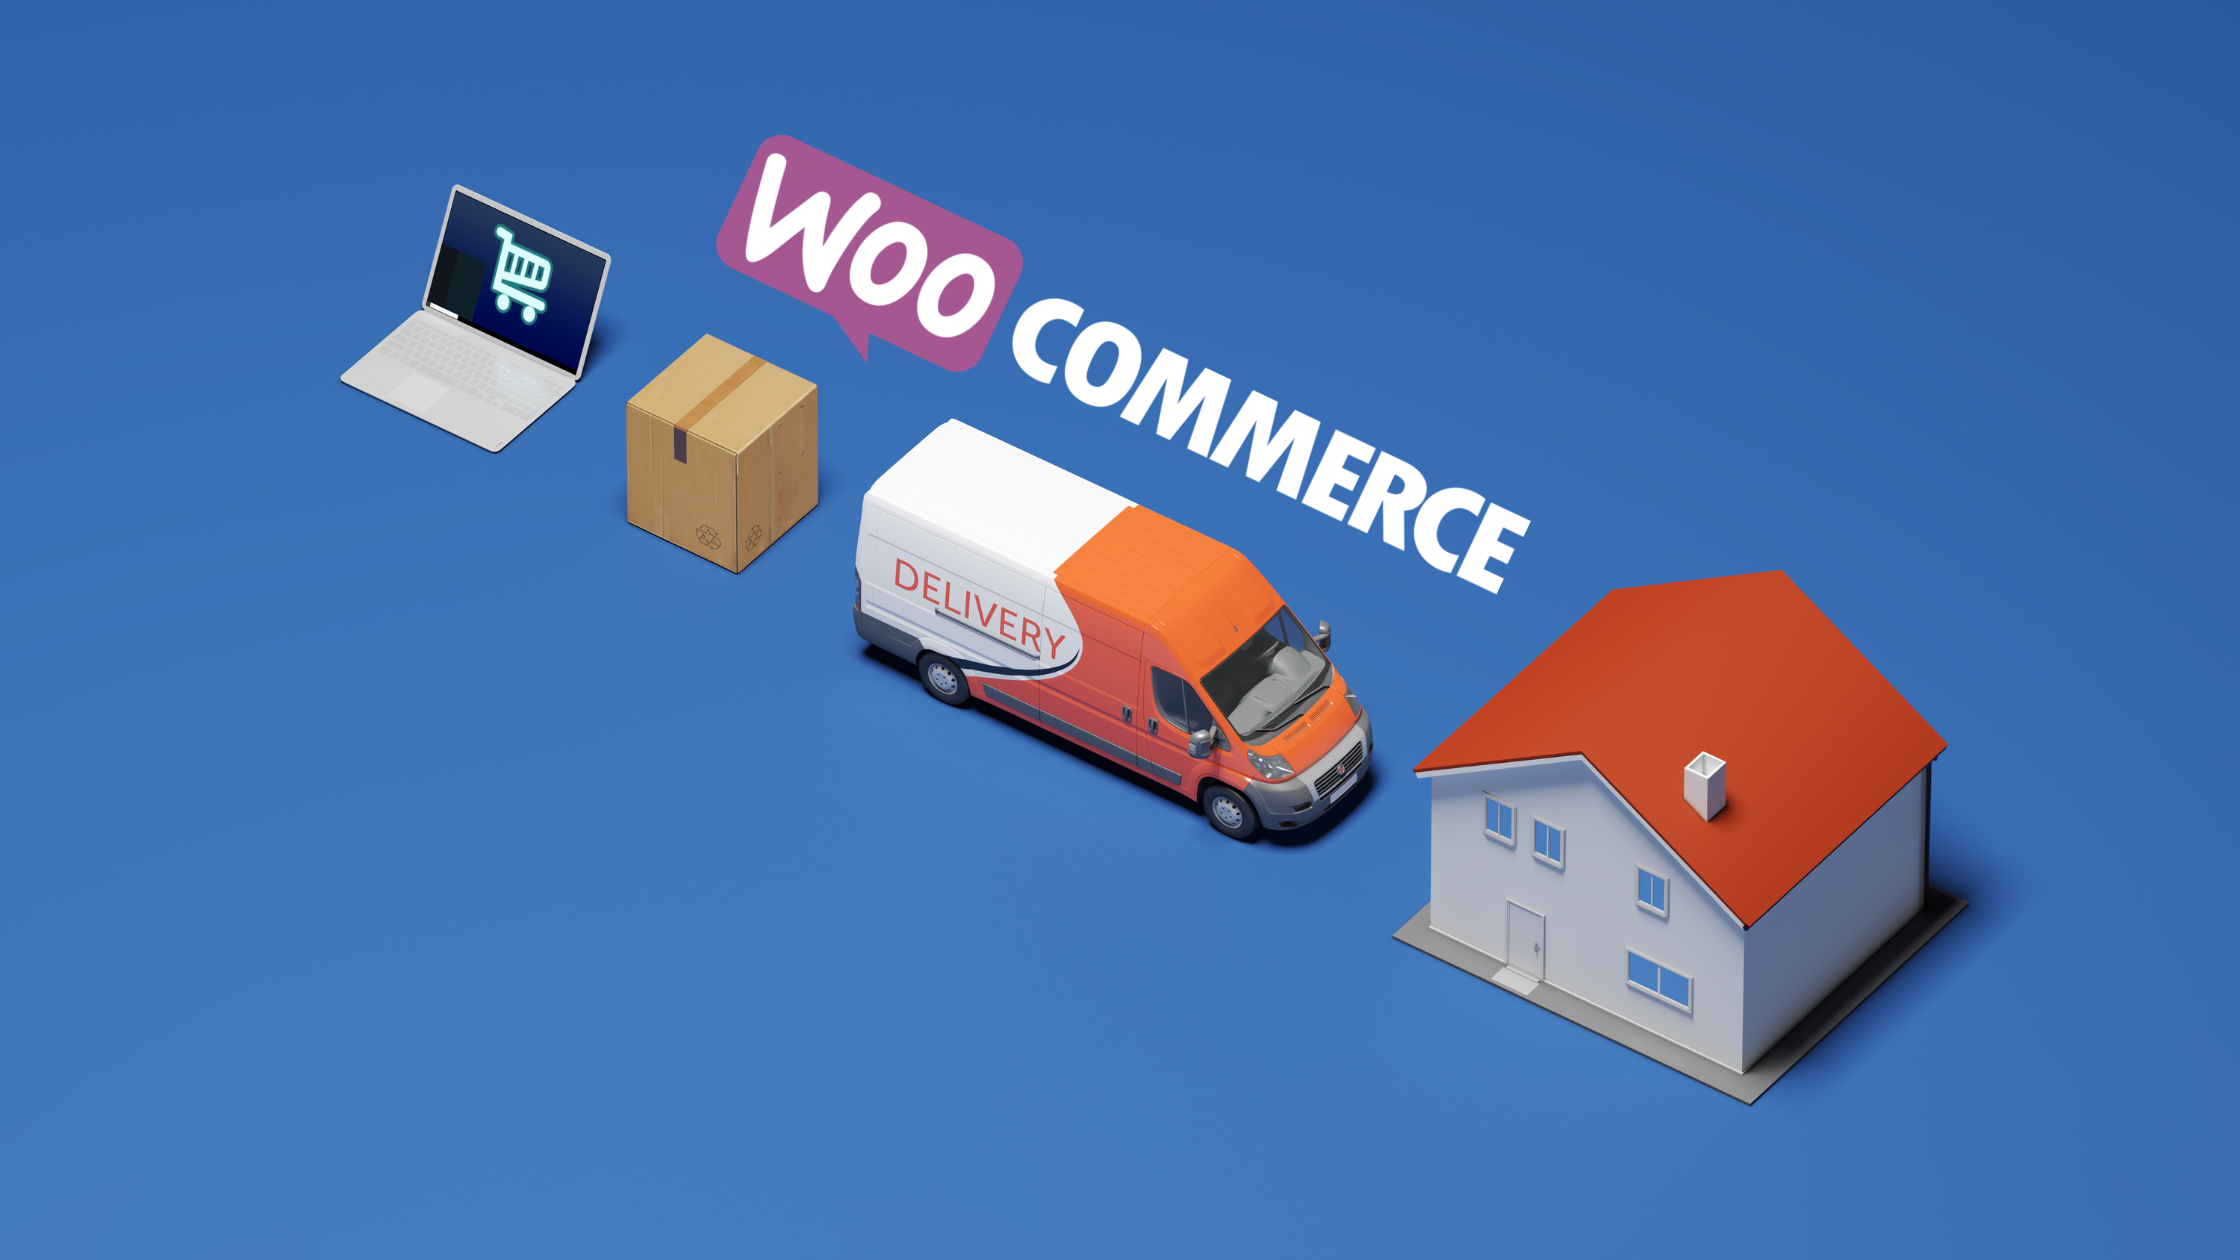 WooCommerce Shipping: One Plugin to Ship with FedEx, DHL, UPS and more!